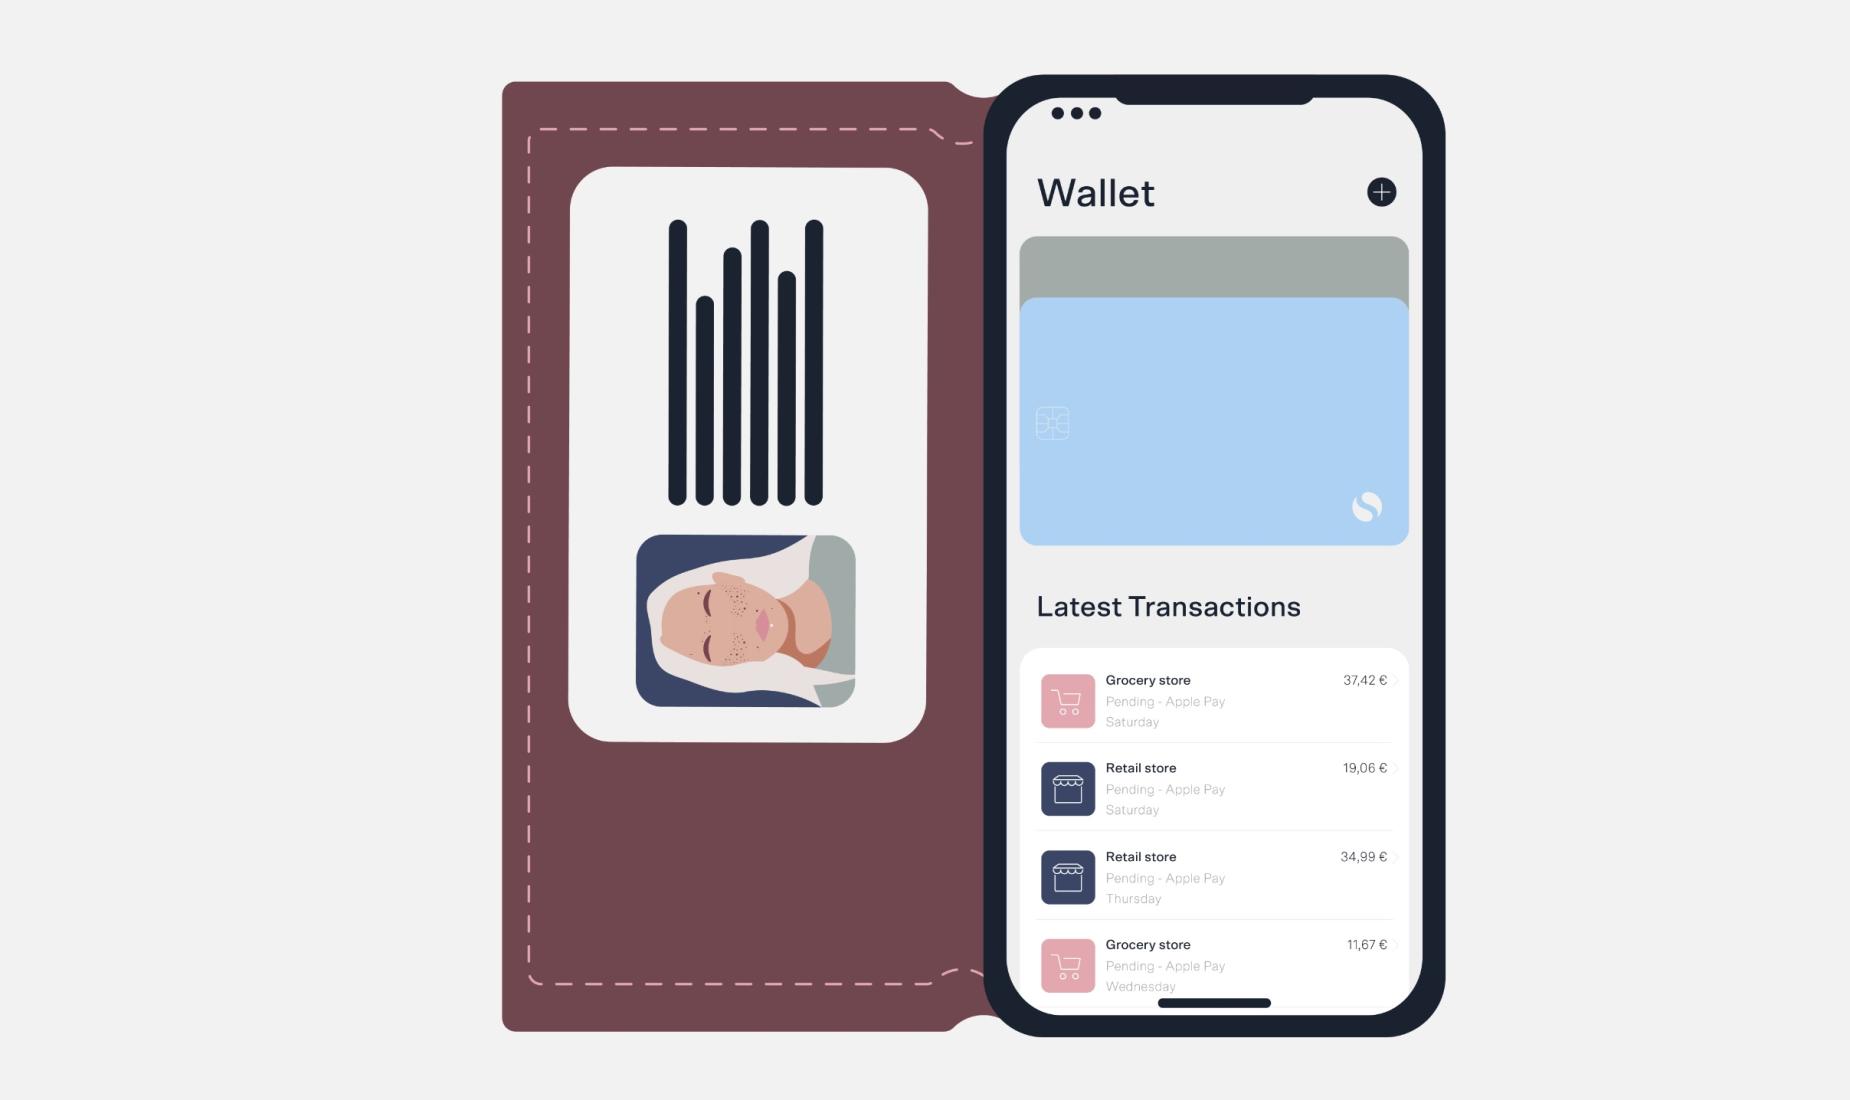 How to reach the top of the digital wallet